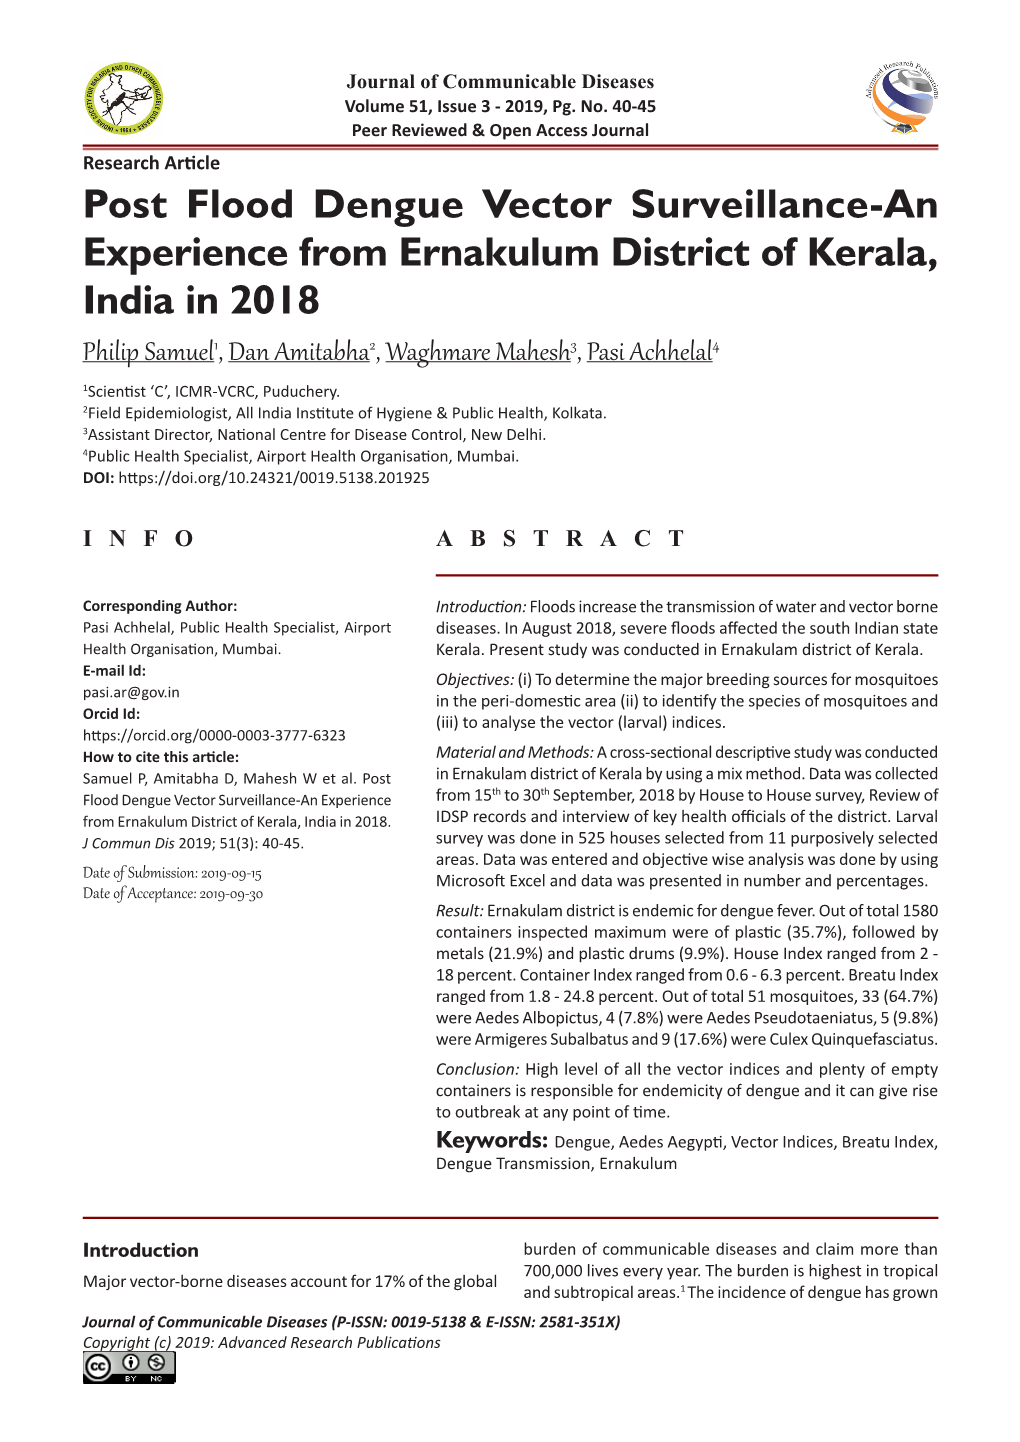 Post Flood Dengue Vector Surveillance-An Experience from Ernakulum District of Kerala, India in 2018